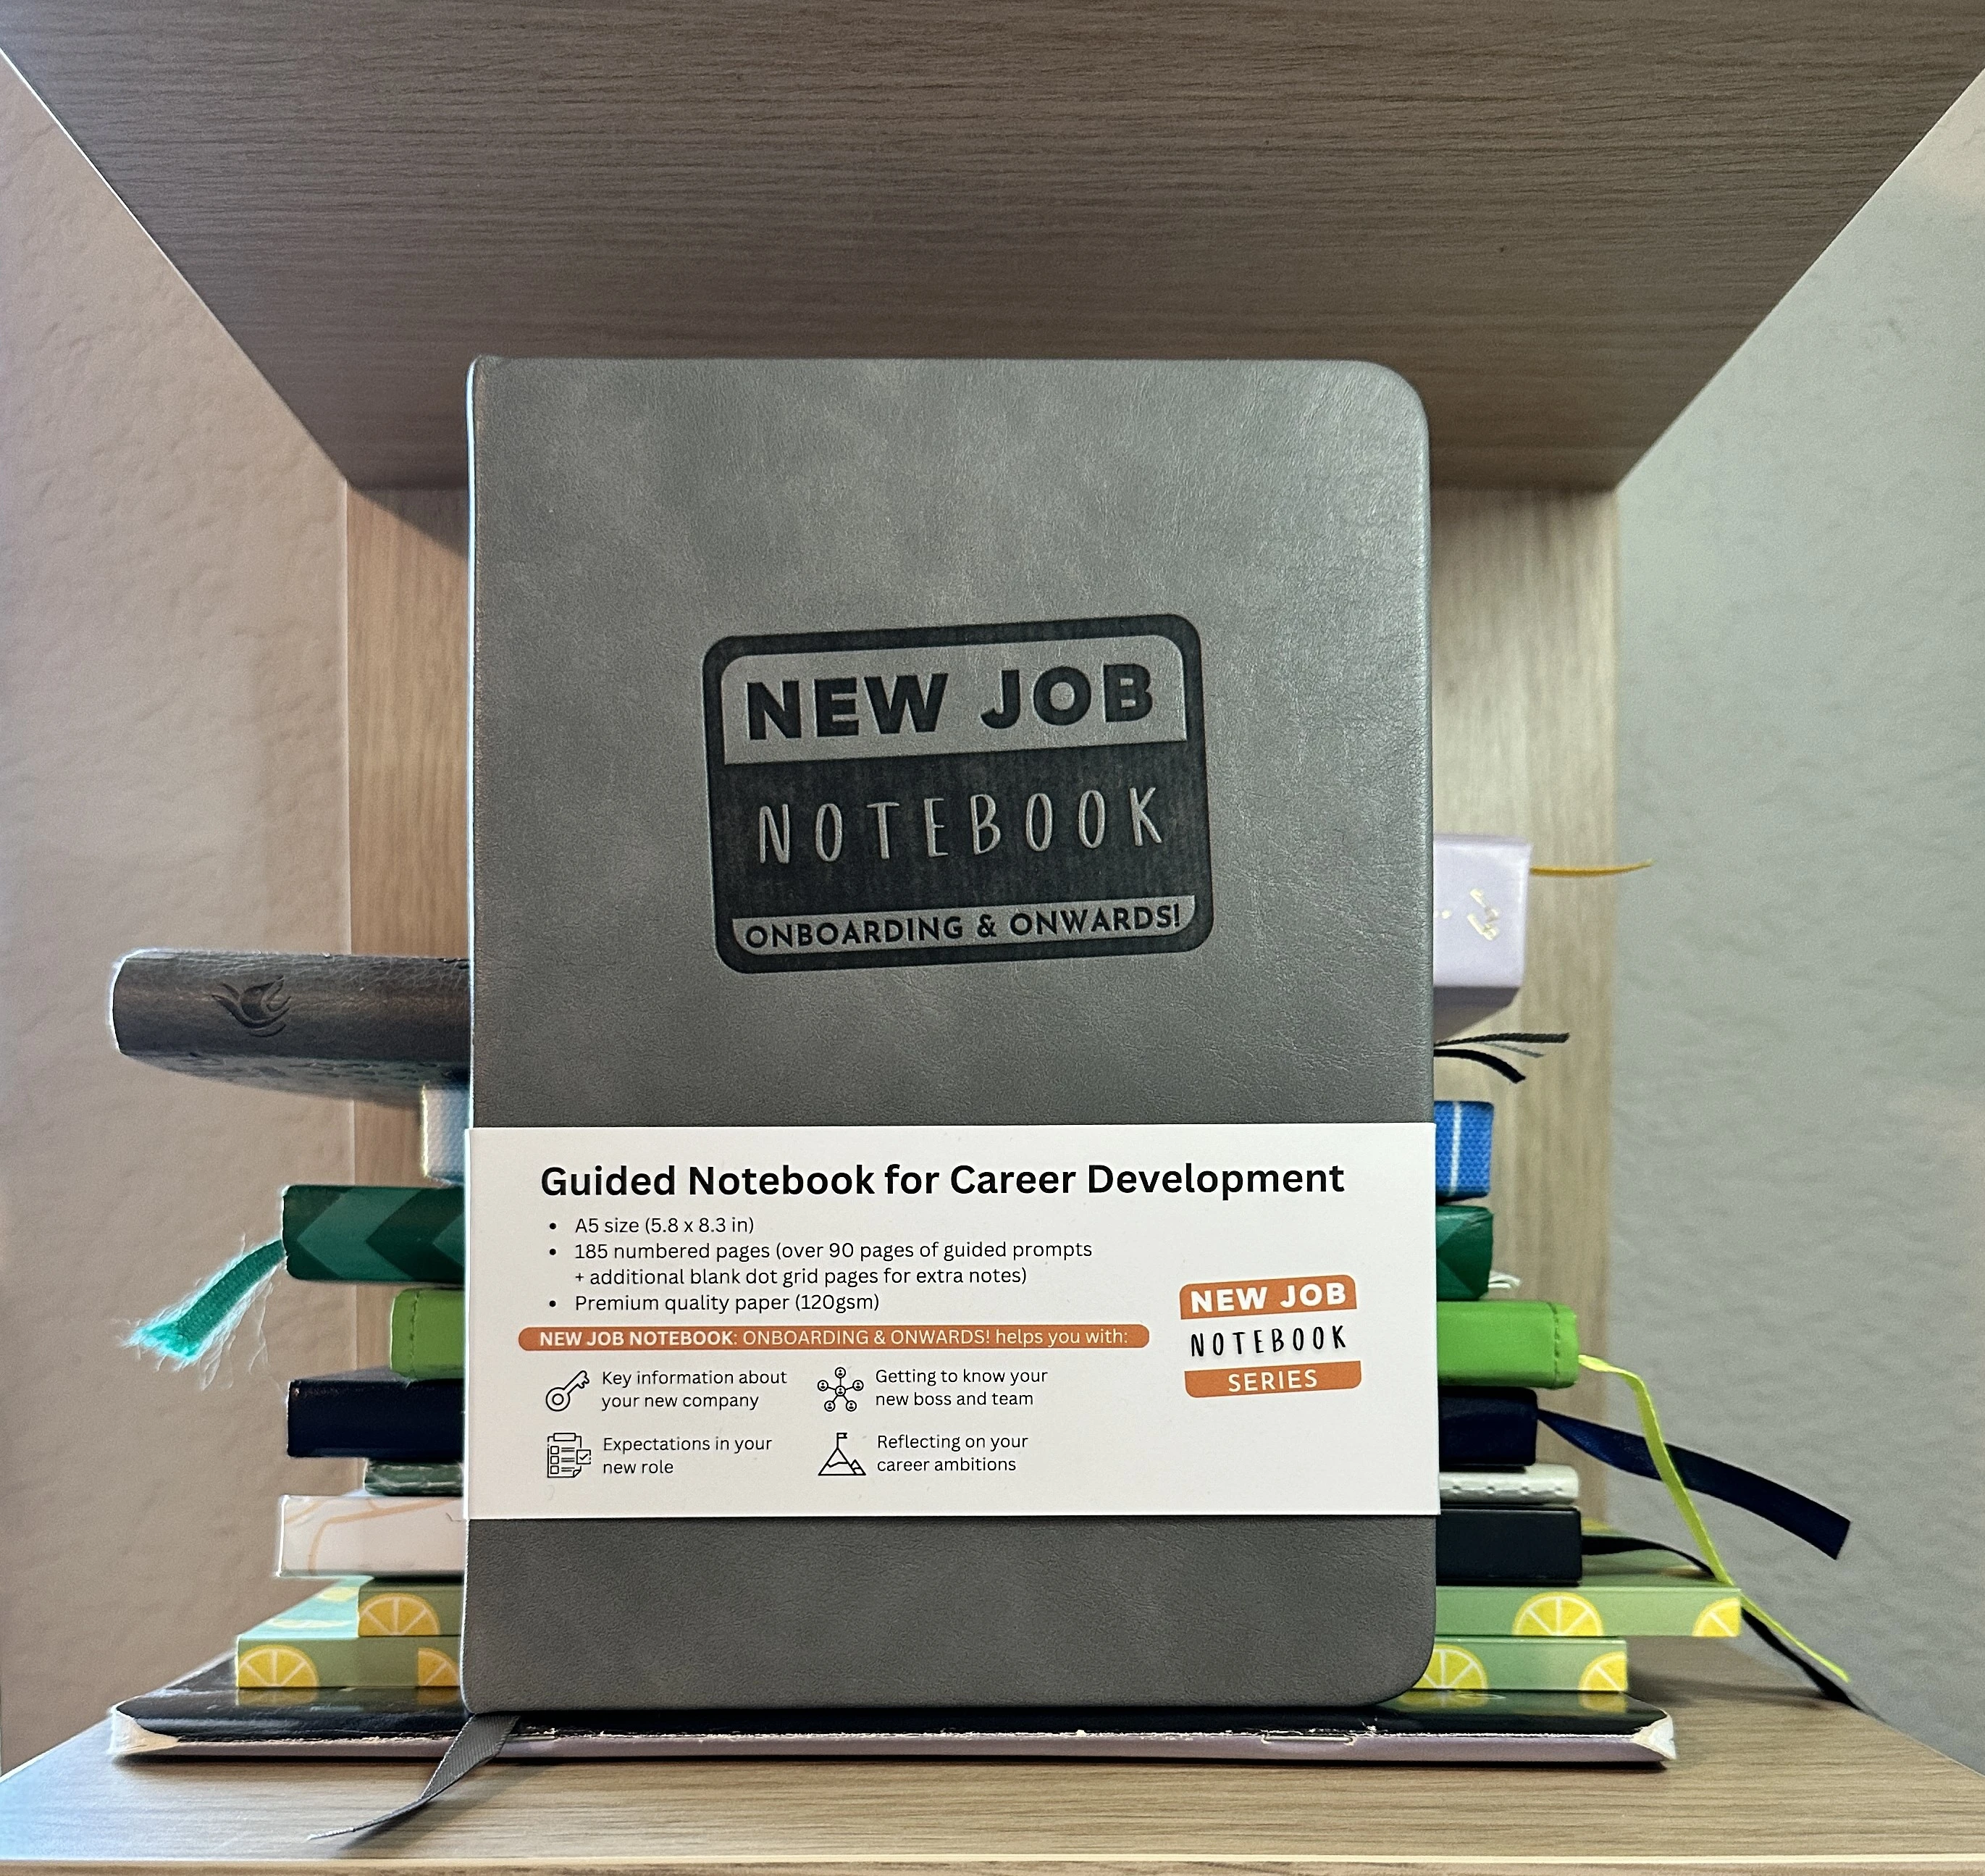 5 Popular Notebooks to Use for a New Job